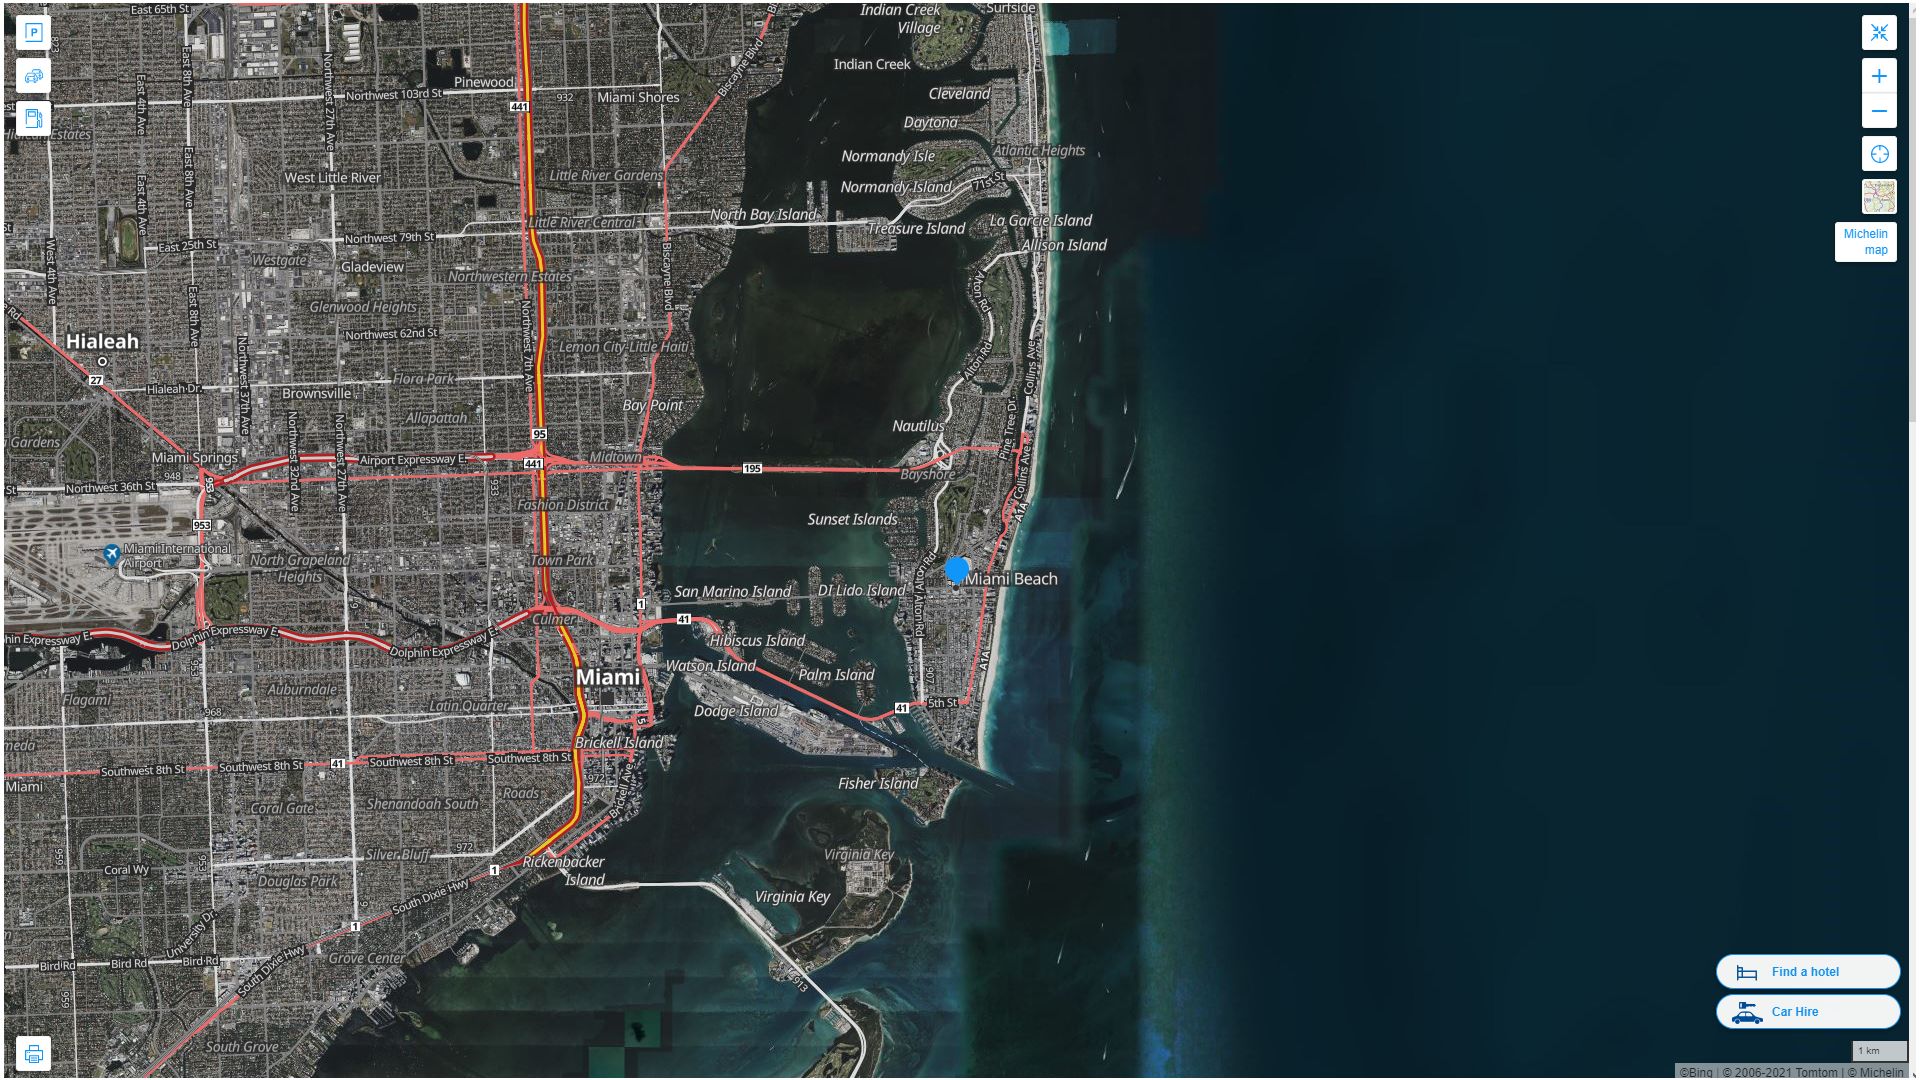 Miami Beach Florida Highway and Road Map with Satellite View